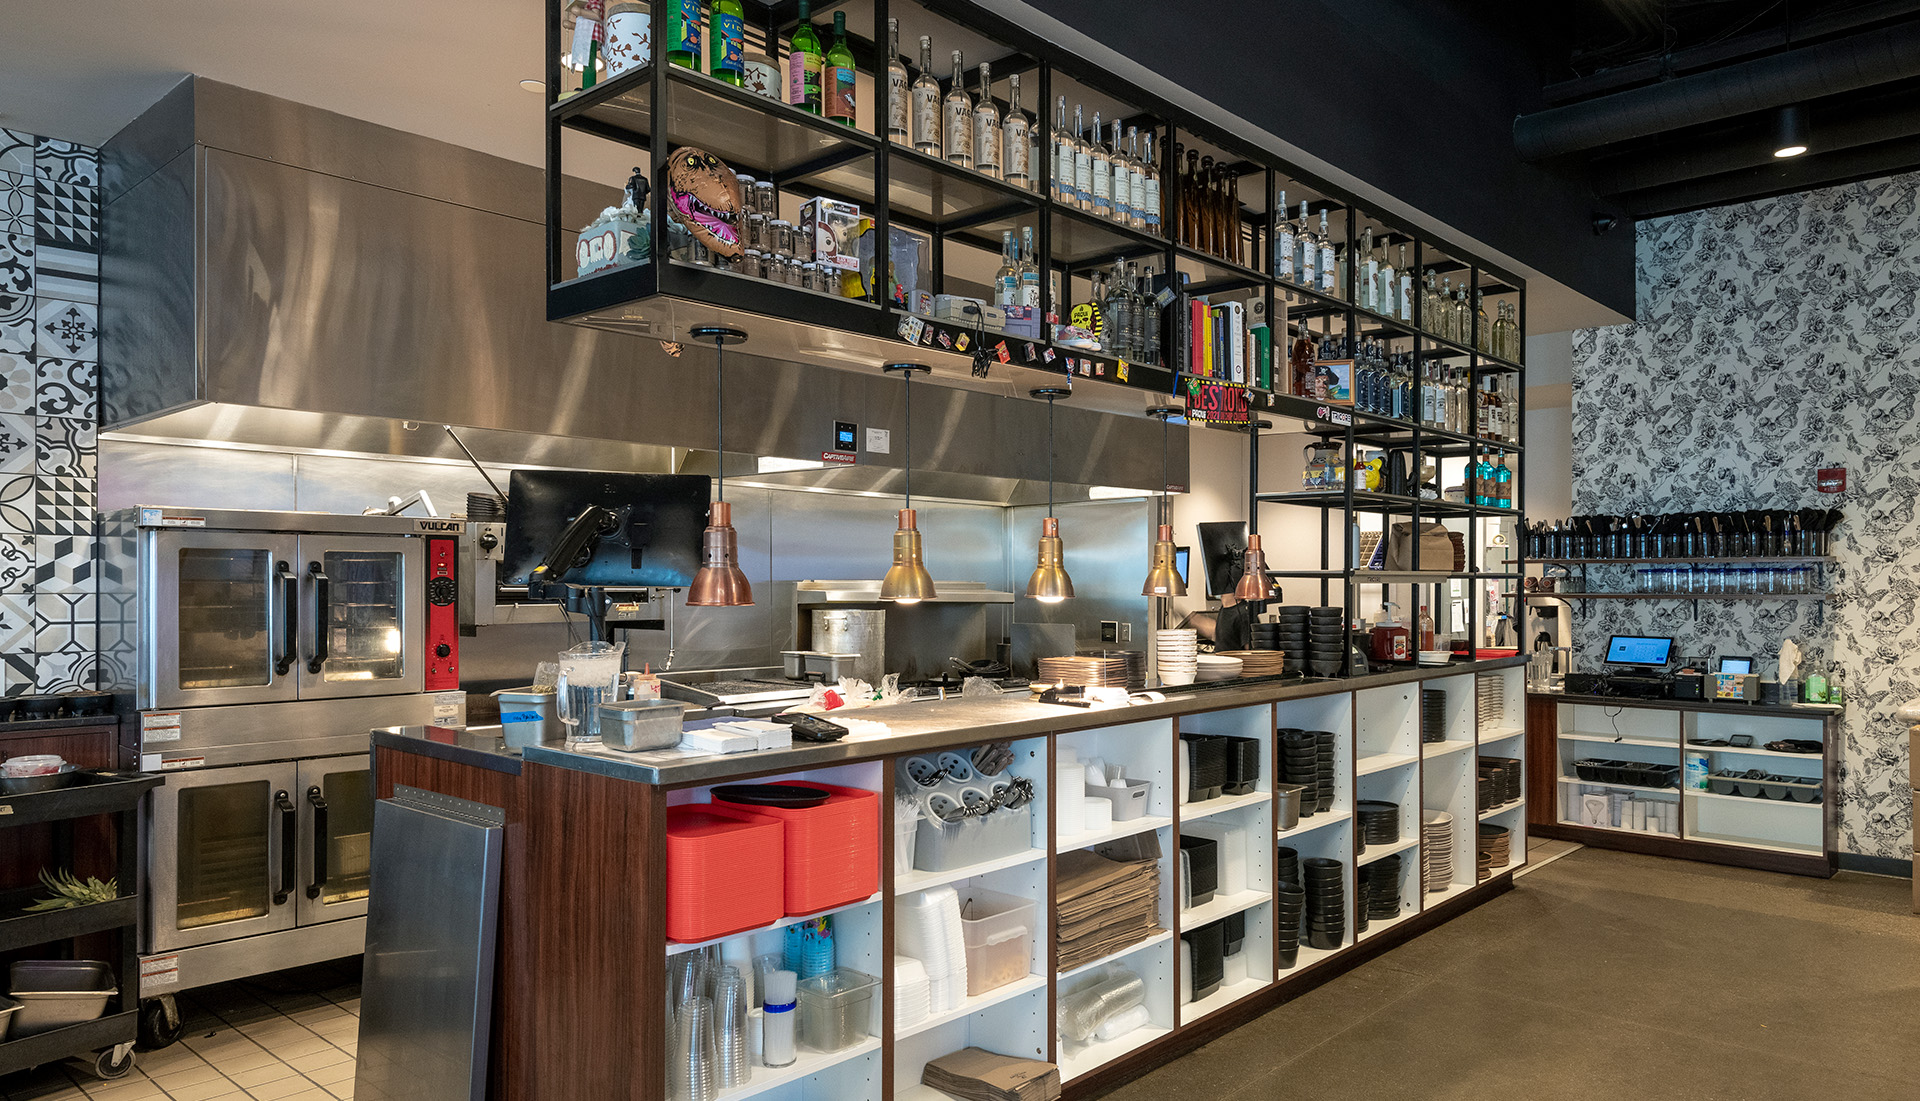 A section of the kitchen is visible to guests, allowing them to be part of the creative cooking and dining experience. Sleek equipment, decorative shelving, and deliberate lighting design blend the kitchen and dining spaces.